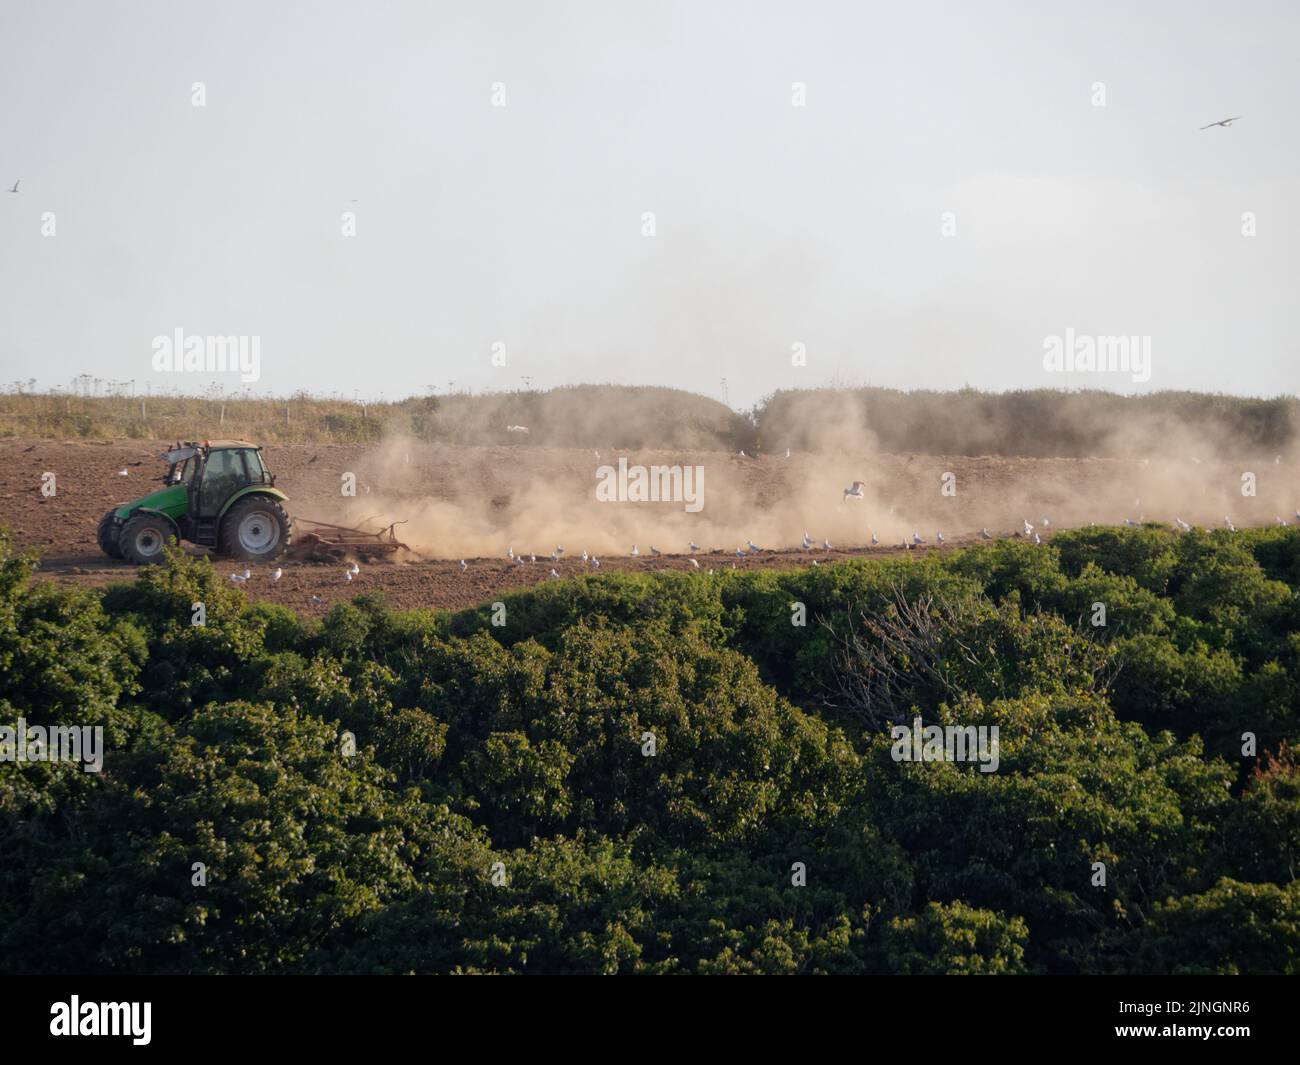 UK Weather, Crantock, Cornwall, UK. A farmer raises large dust clouds from his arid soil as he harrows the parched soil in hope of being able to sow crops. The Environment Agency meets on Friday to decide if drought conditions on water usage should be introduced in the south west of England. 11th August 2022. Robert Taylor Alamy Live News Stock Photo